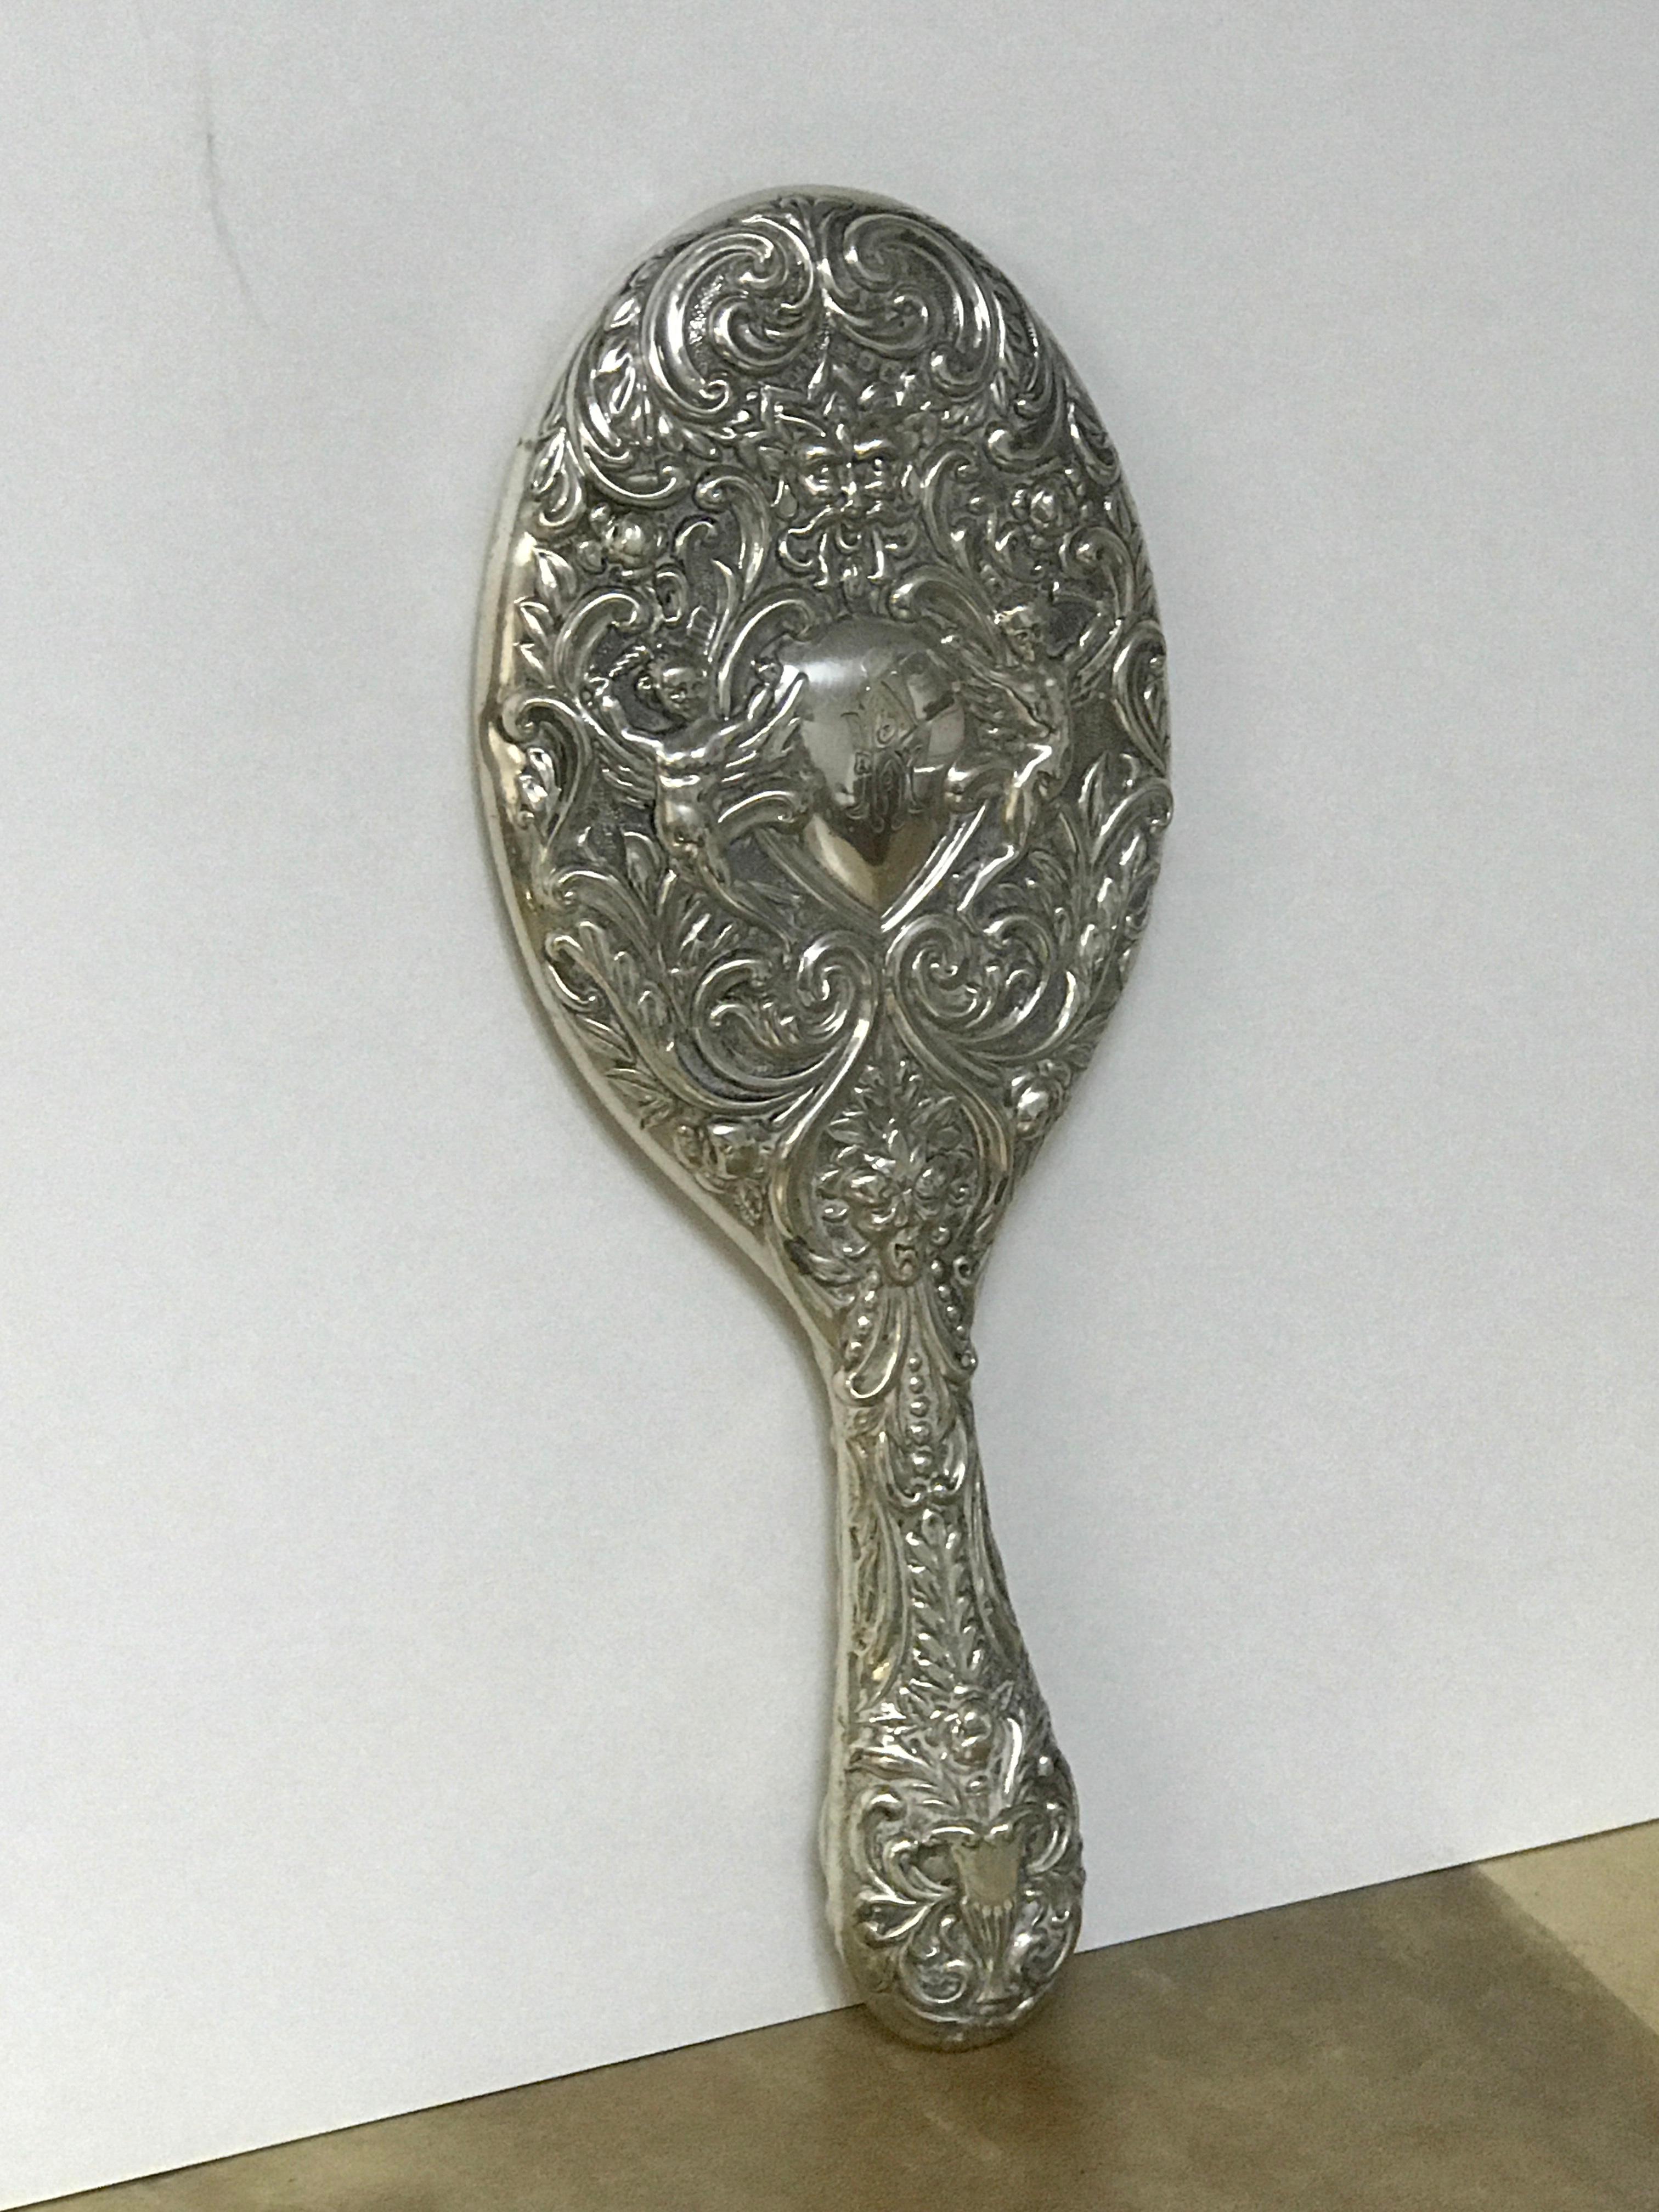 English Sterling Hand Mirror, Birmingham, 1899

Indulge in the luxurious charm of late 19th century elegance with this beautiful English sterling hand mirror. Exquisitely crafted in Birmingham 1899, the mirror is a perfect testimony to High